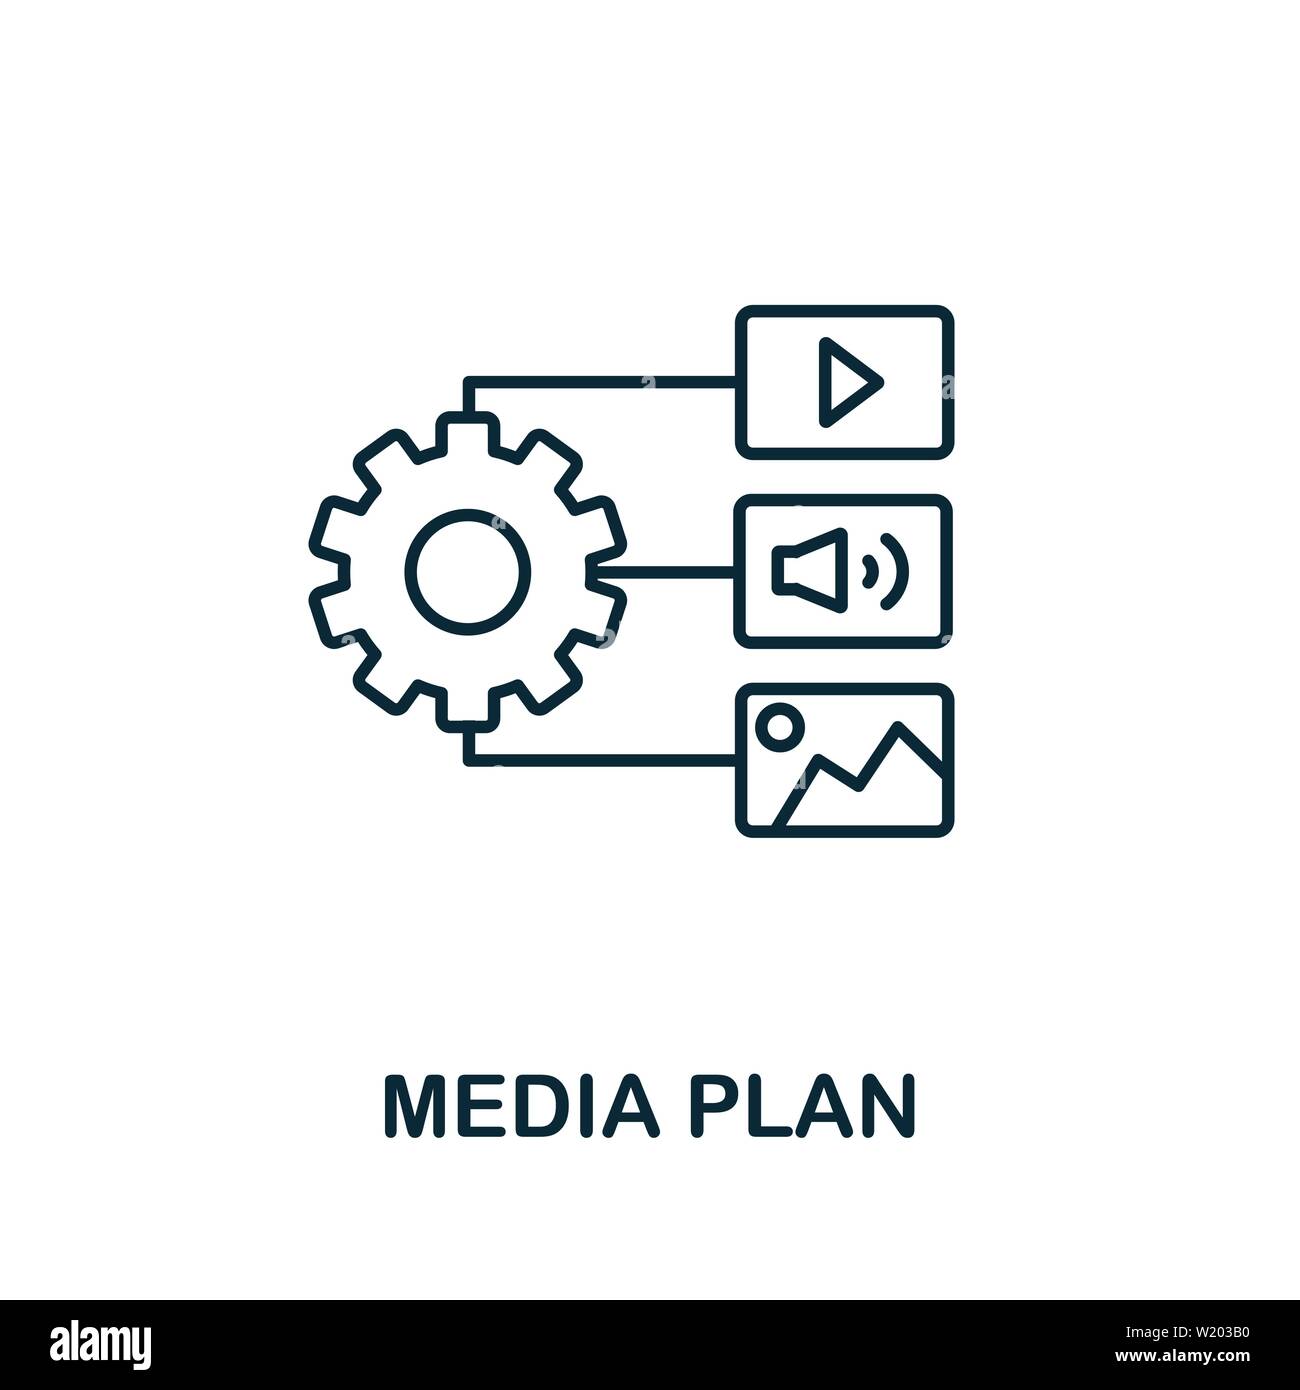 Media Plan outline icon. Thin line concept element from content icons collection. Creative Media Plan icon for mobile apps and web usage Stock Vector